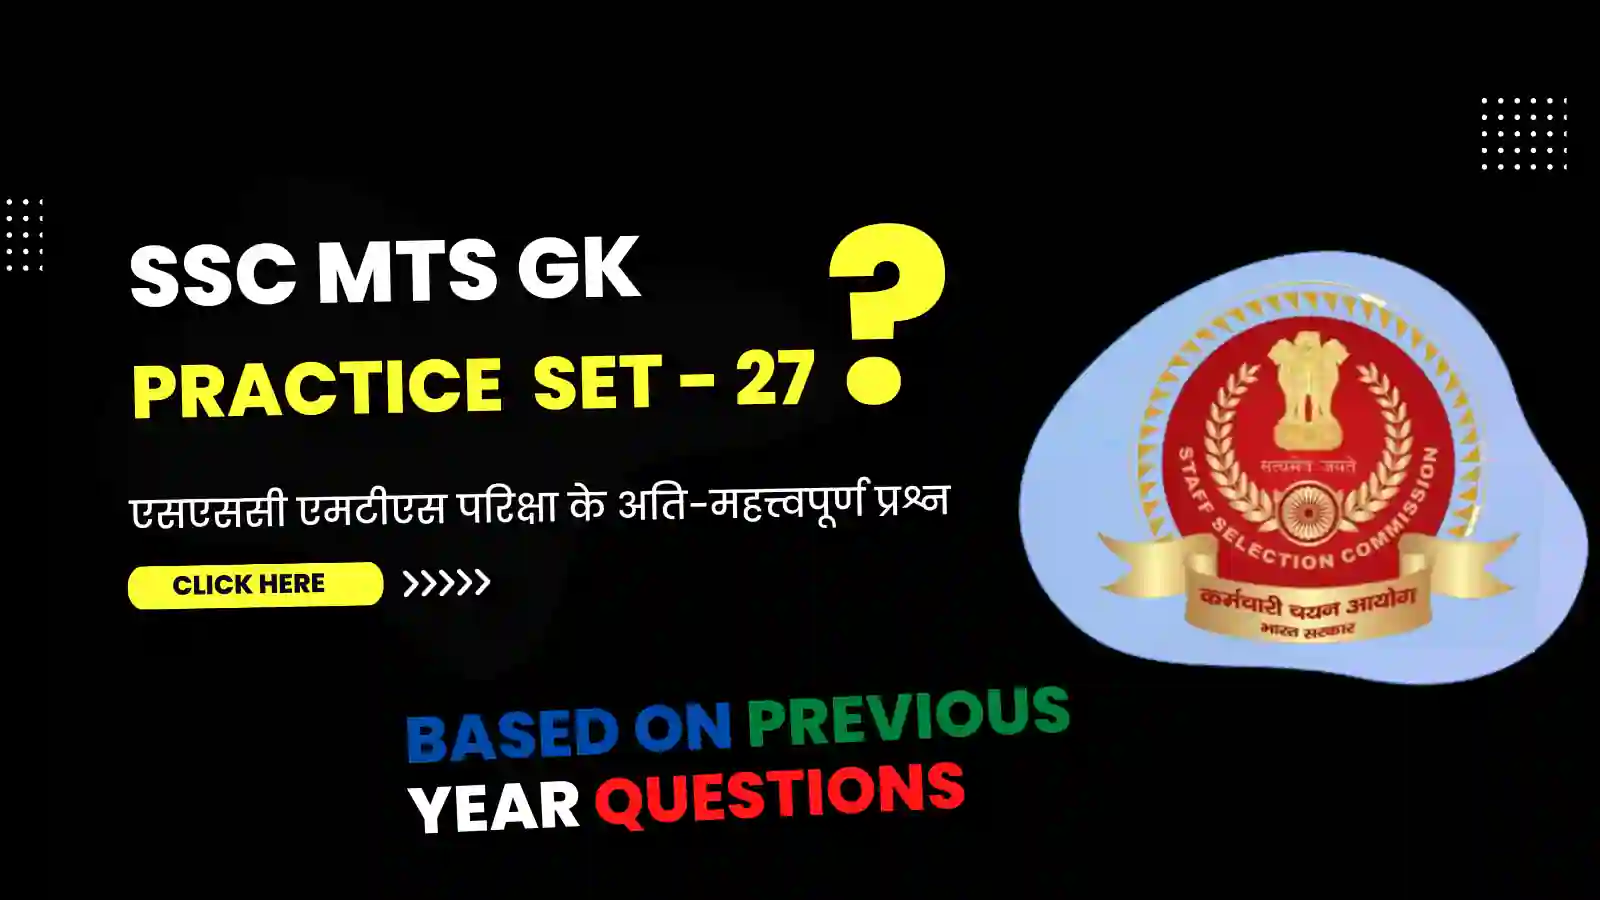 SSC MTS GK Question Practice Set in Hindi - 27